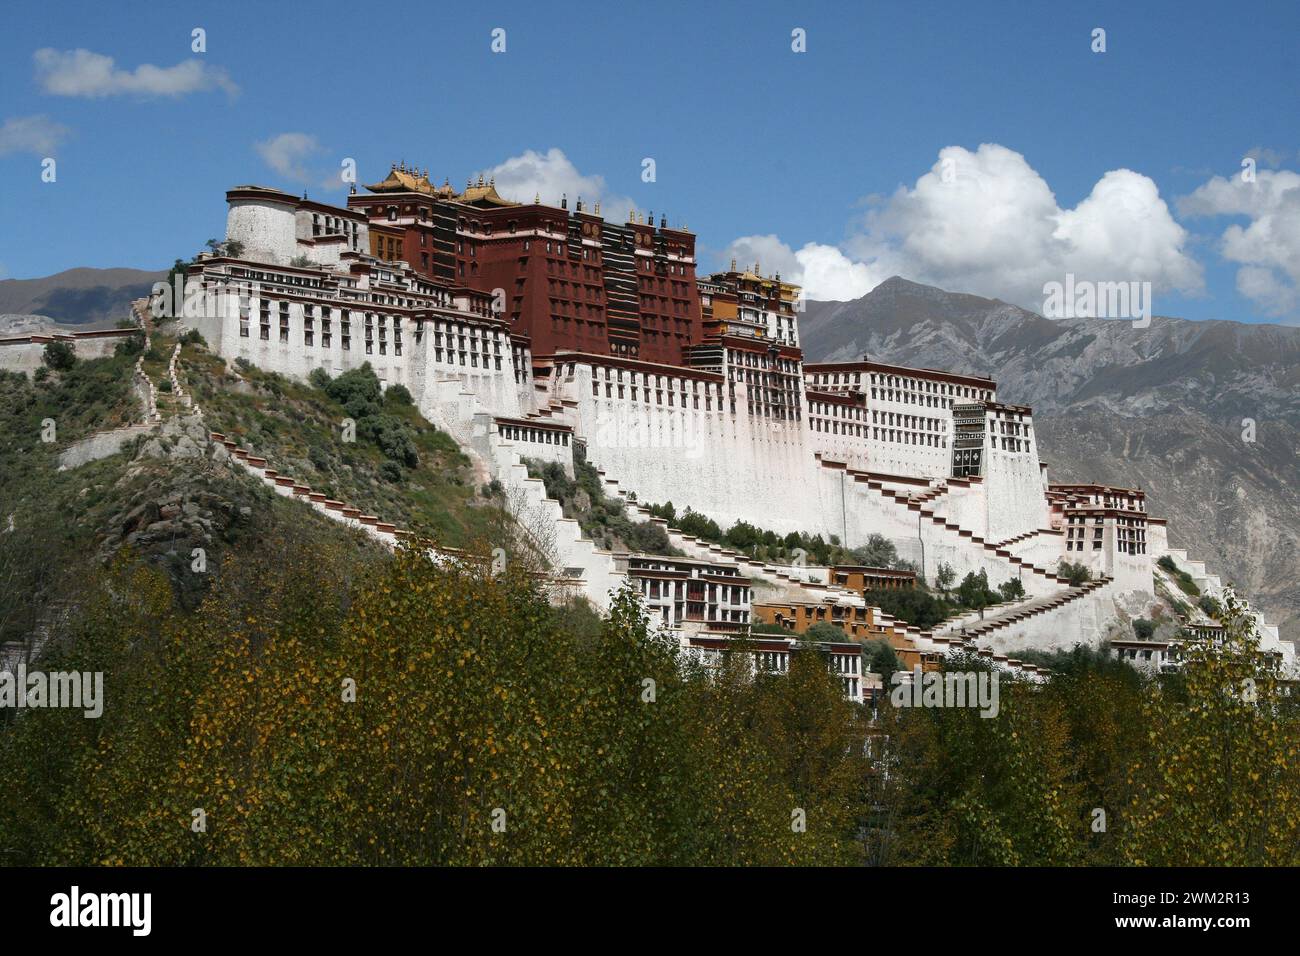 The Potala Palace is a dzong fortress in Lhasa, capital of the Tibet Autonomous Region in China & was the winter palace of the Dalai Lamas. Stock Photo